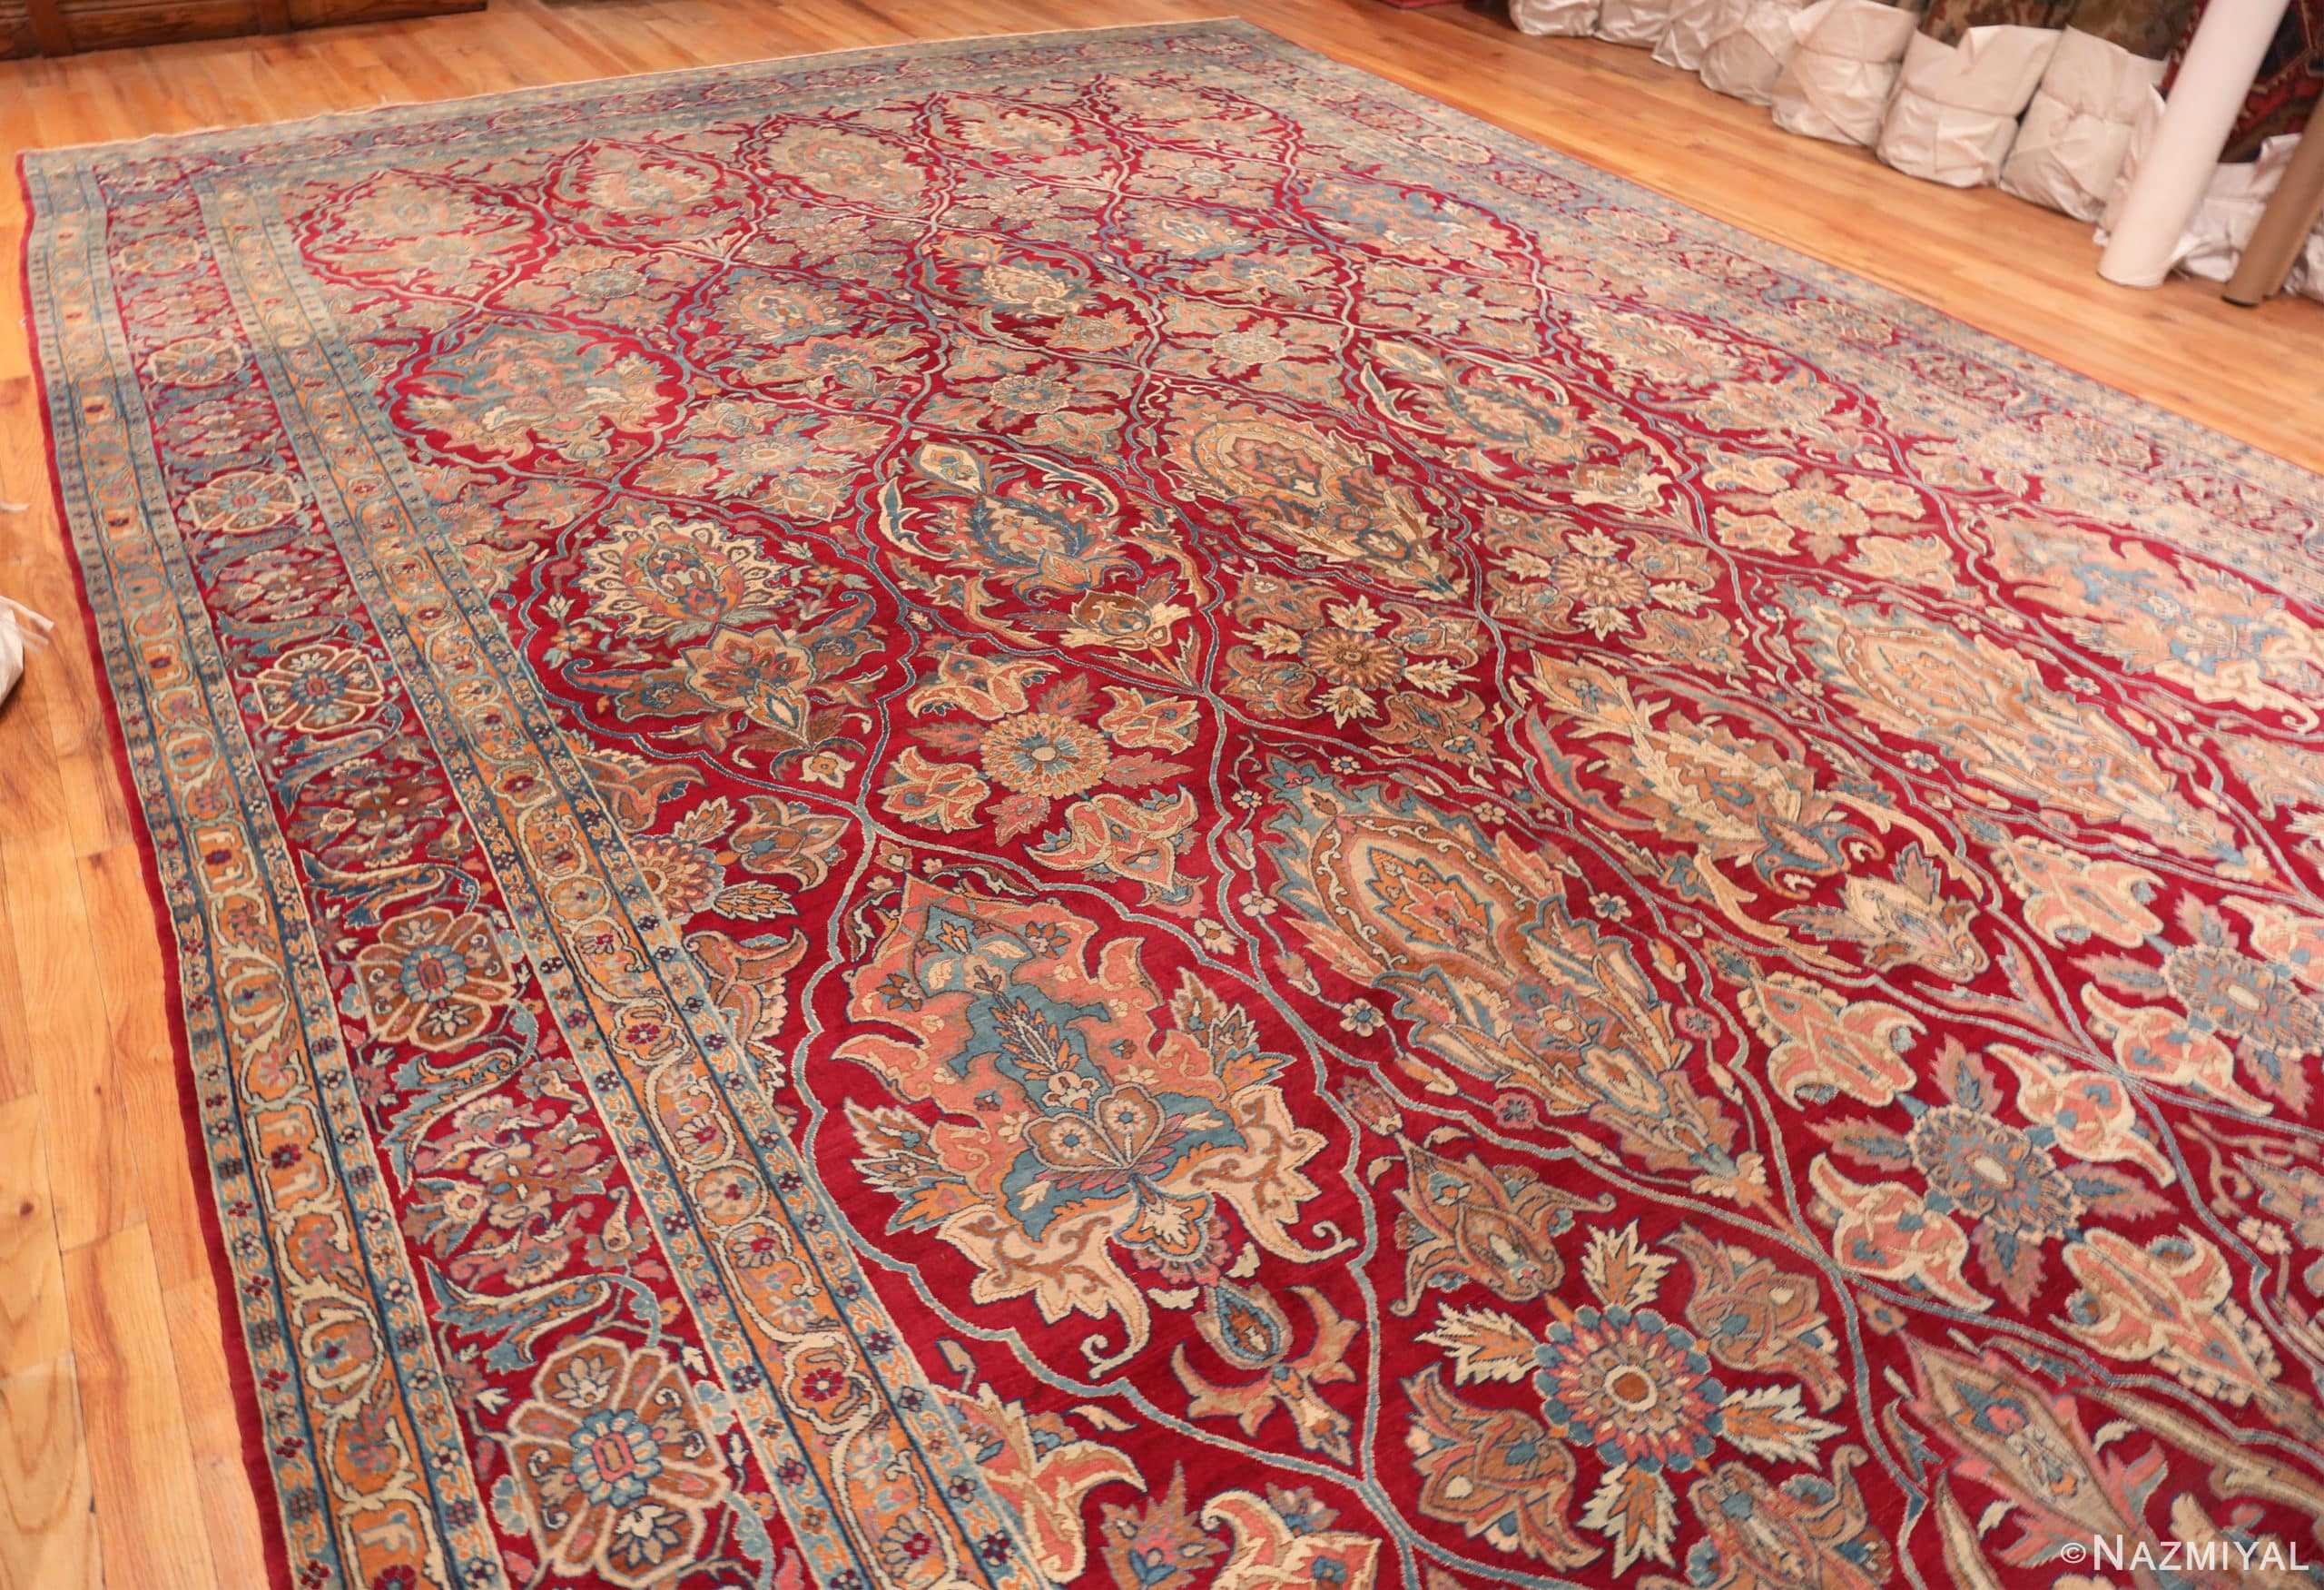 Whole View Of Oversized Antique Persian Shield Design Kerman Rug 70810 by Nazmiyal NYC